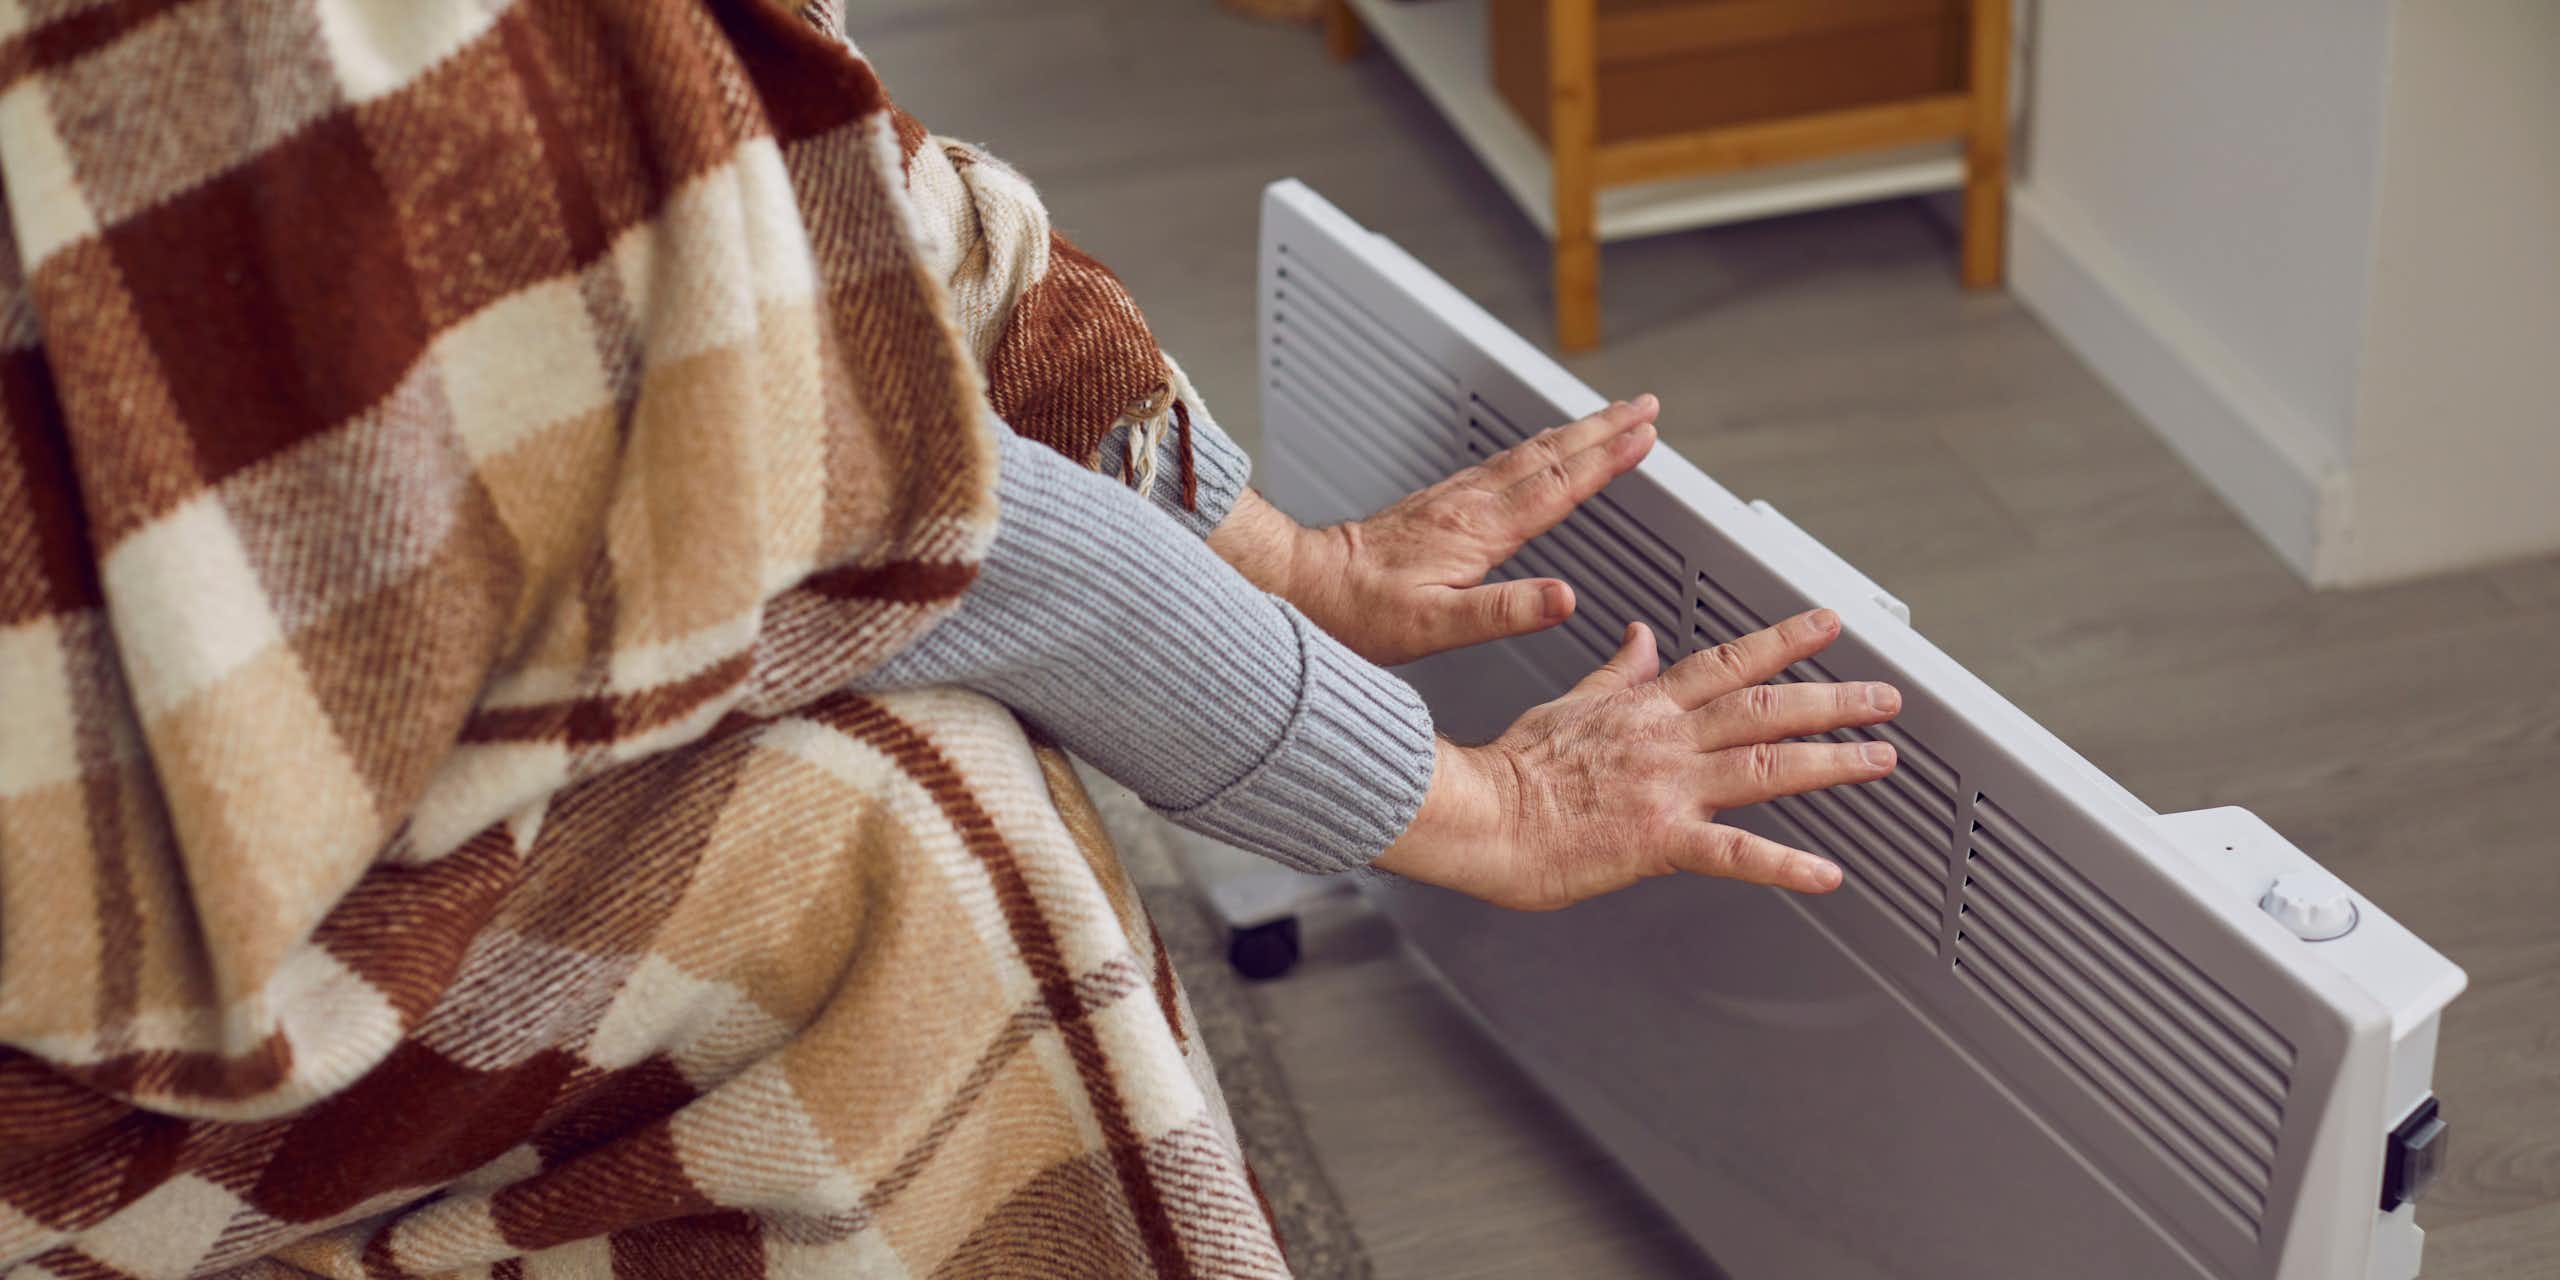 a person wrapped in a blanket holds their hands close to a portable heater